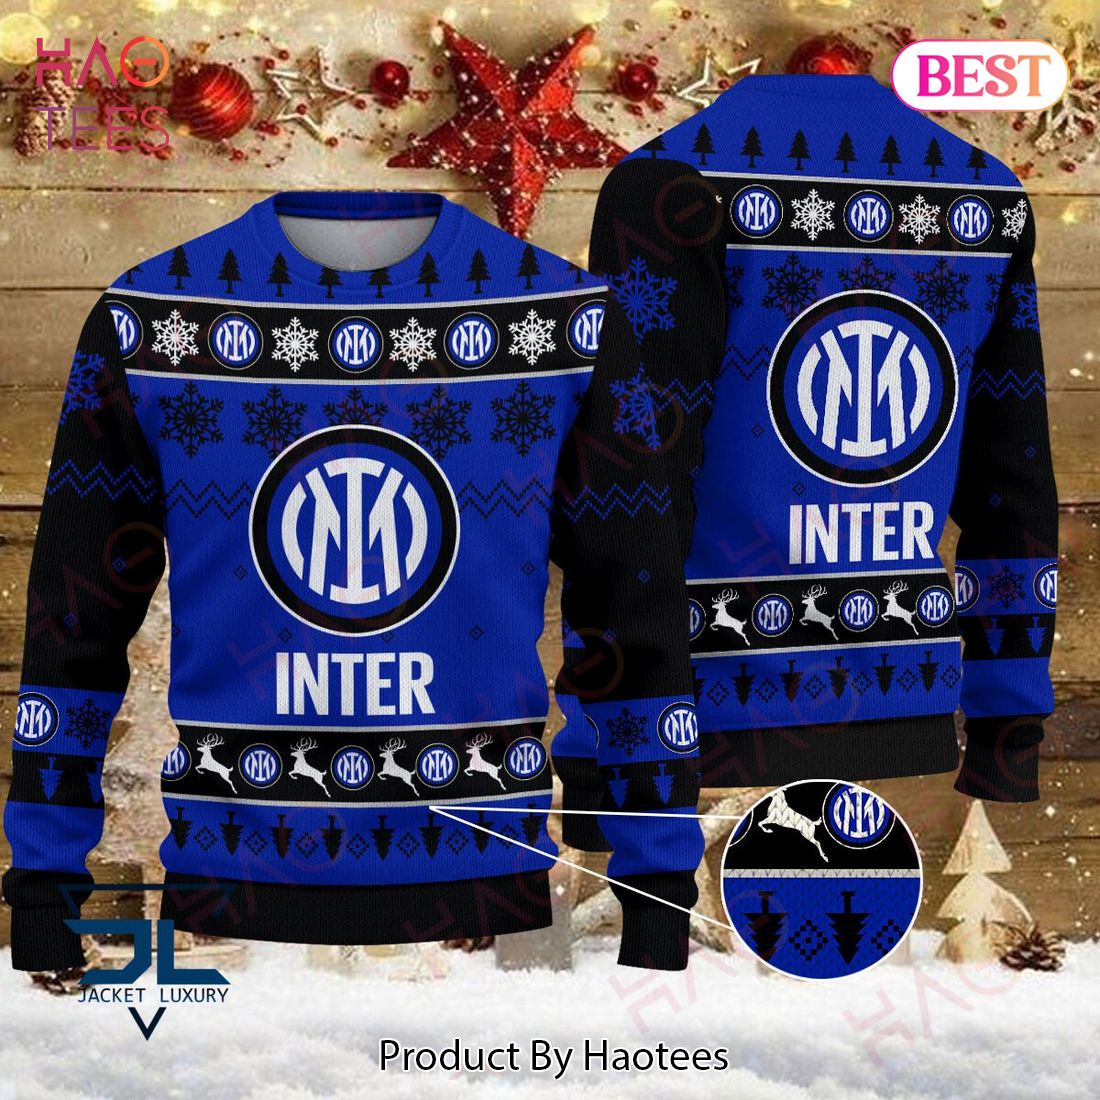 Inter Black Mix Blue Luxury Brand Sweater Limited Edition